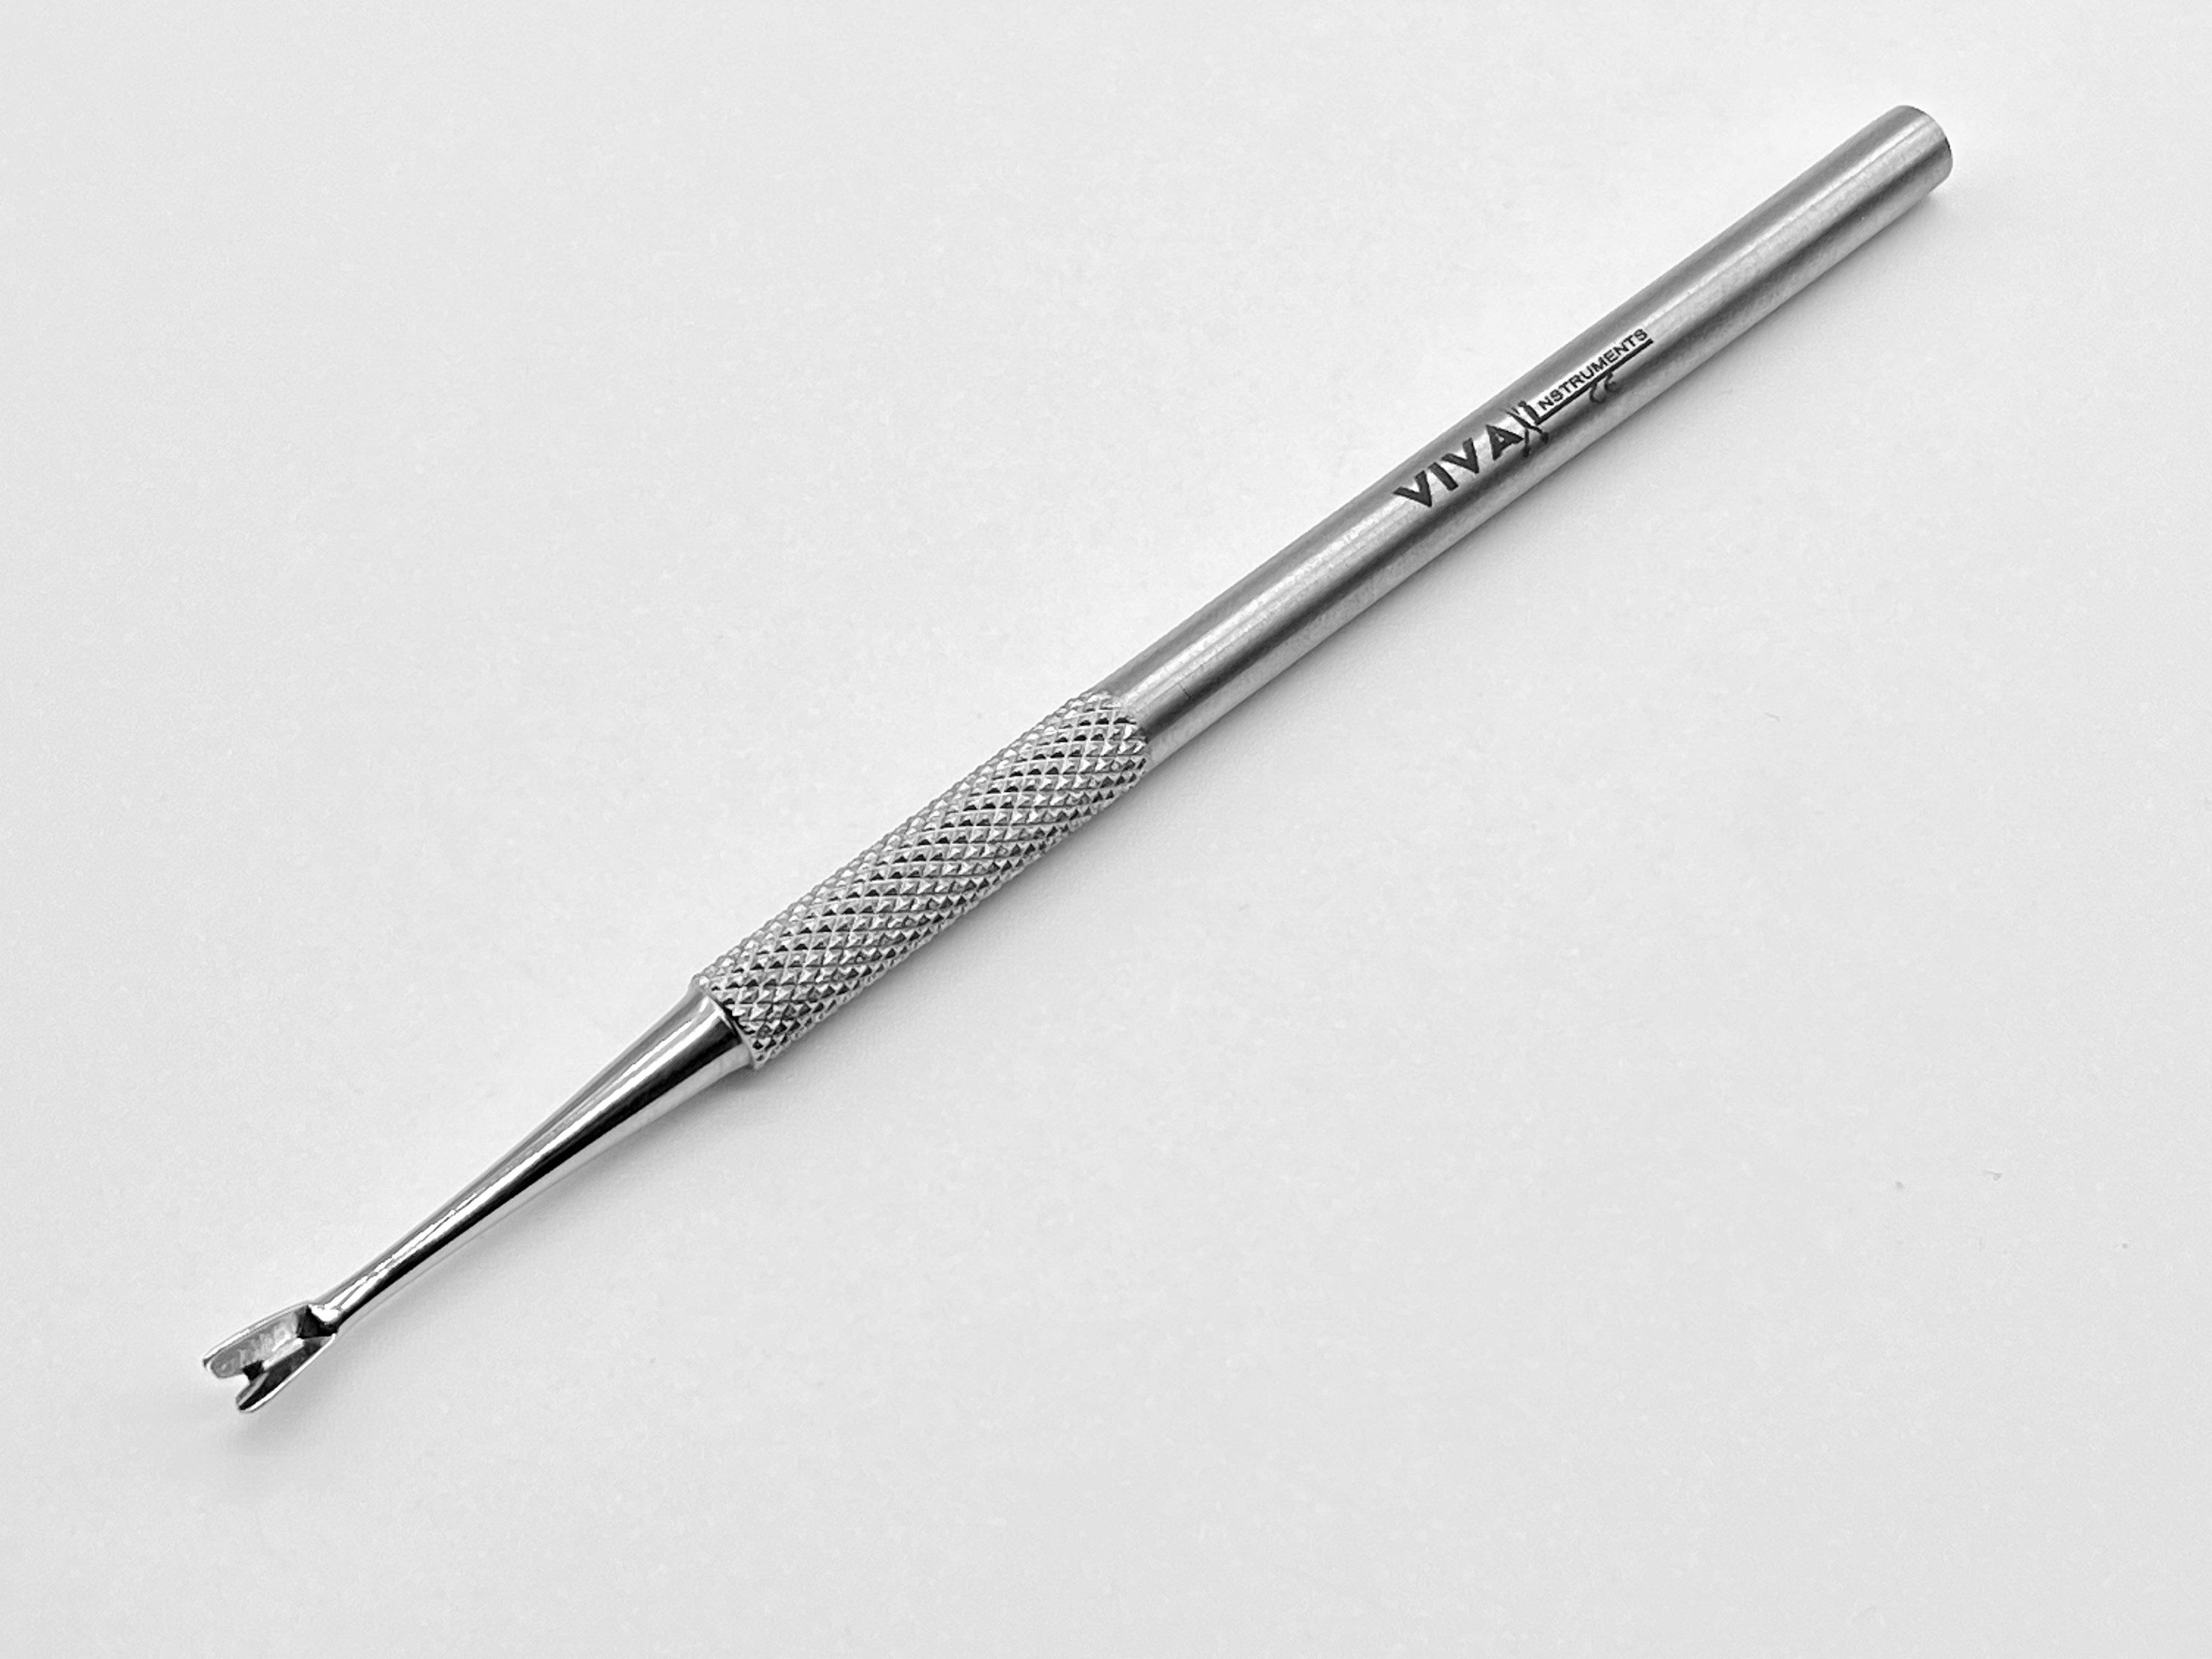 Manicure Tools - Cuticle Nail Trimmer | Manicure Pedicure Tools